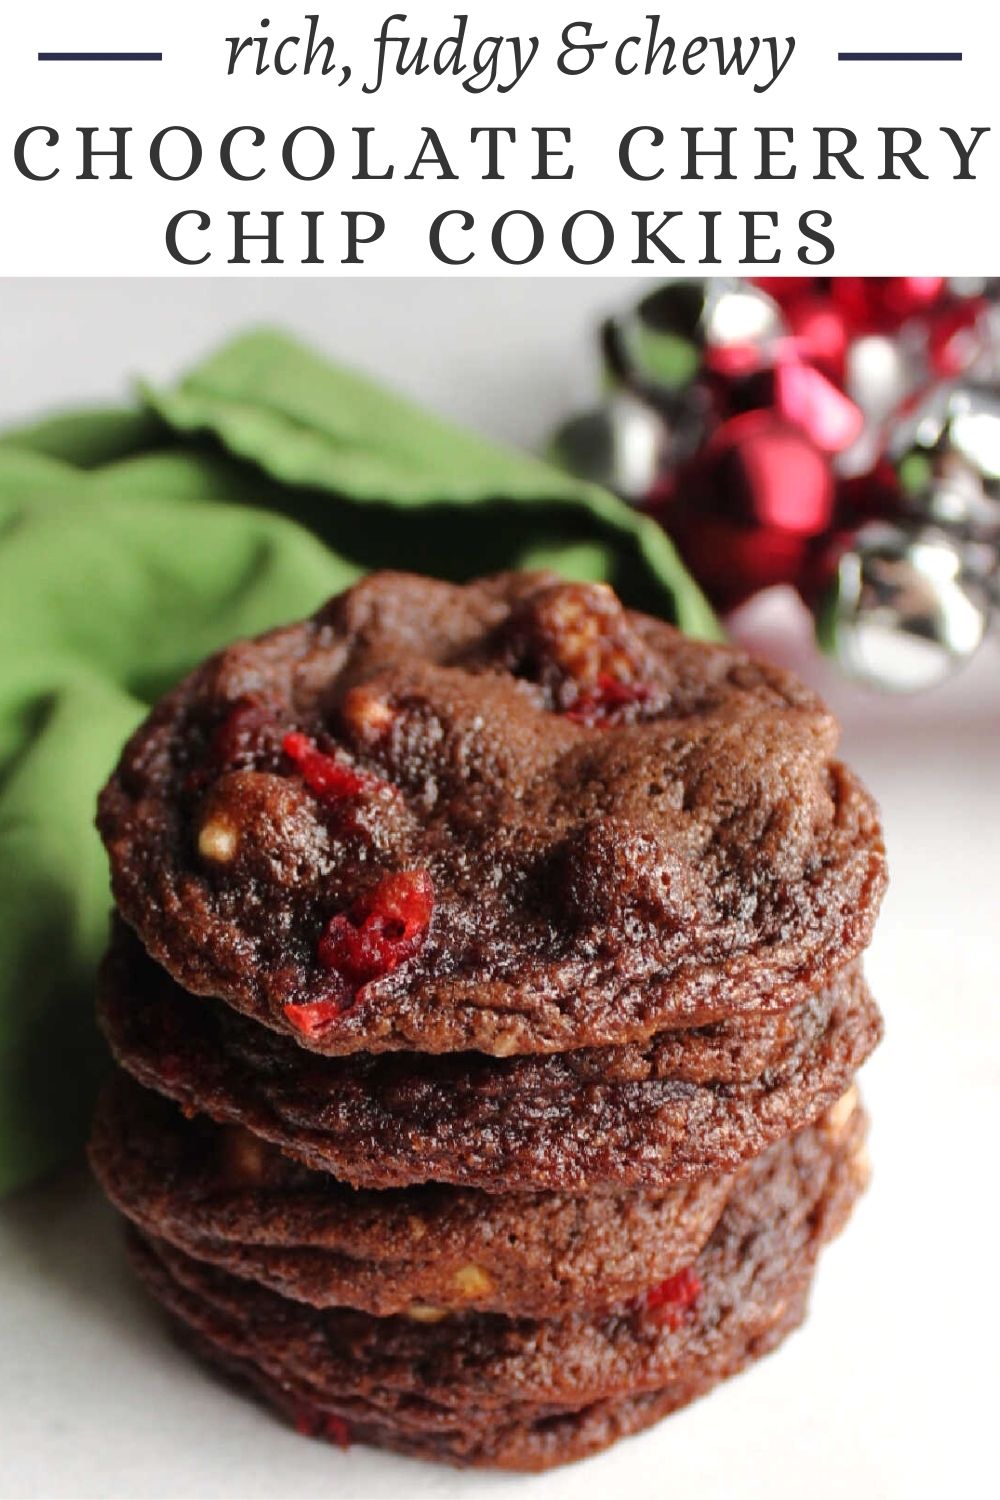 Chocolate cherry chip cookies are inspired by my dad's favorite Christmastime treat, chocolate covered cherries. Super fudgy cookies with white chocolate chips and bits of cherry give you the full flavor in a perfect chewy package.